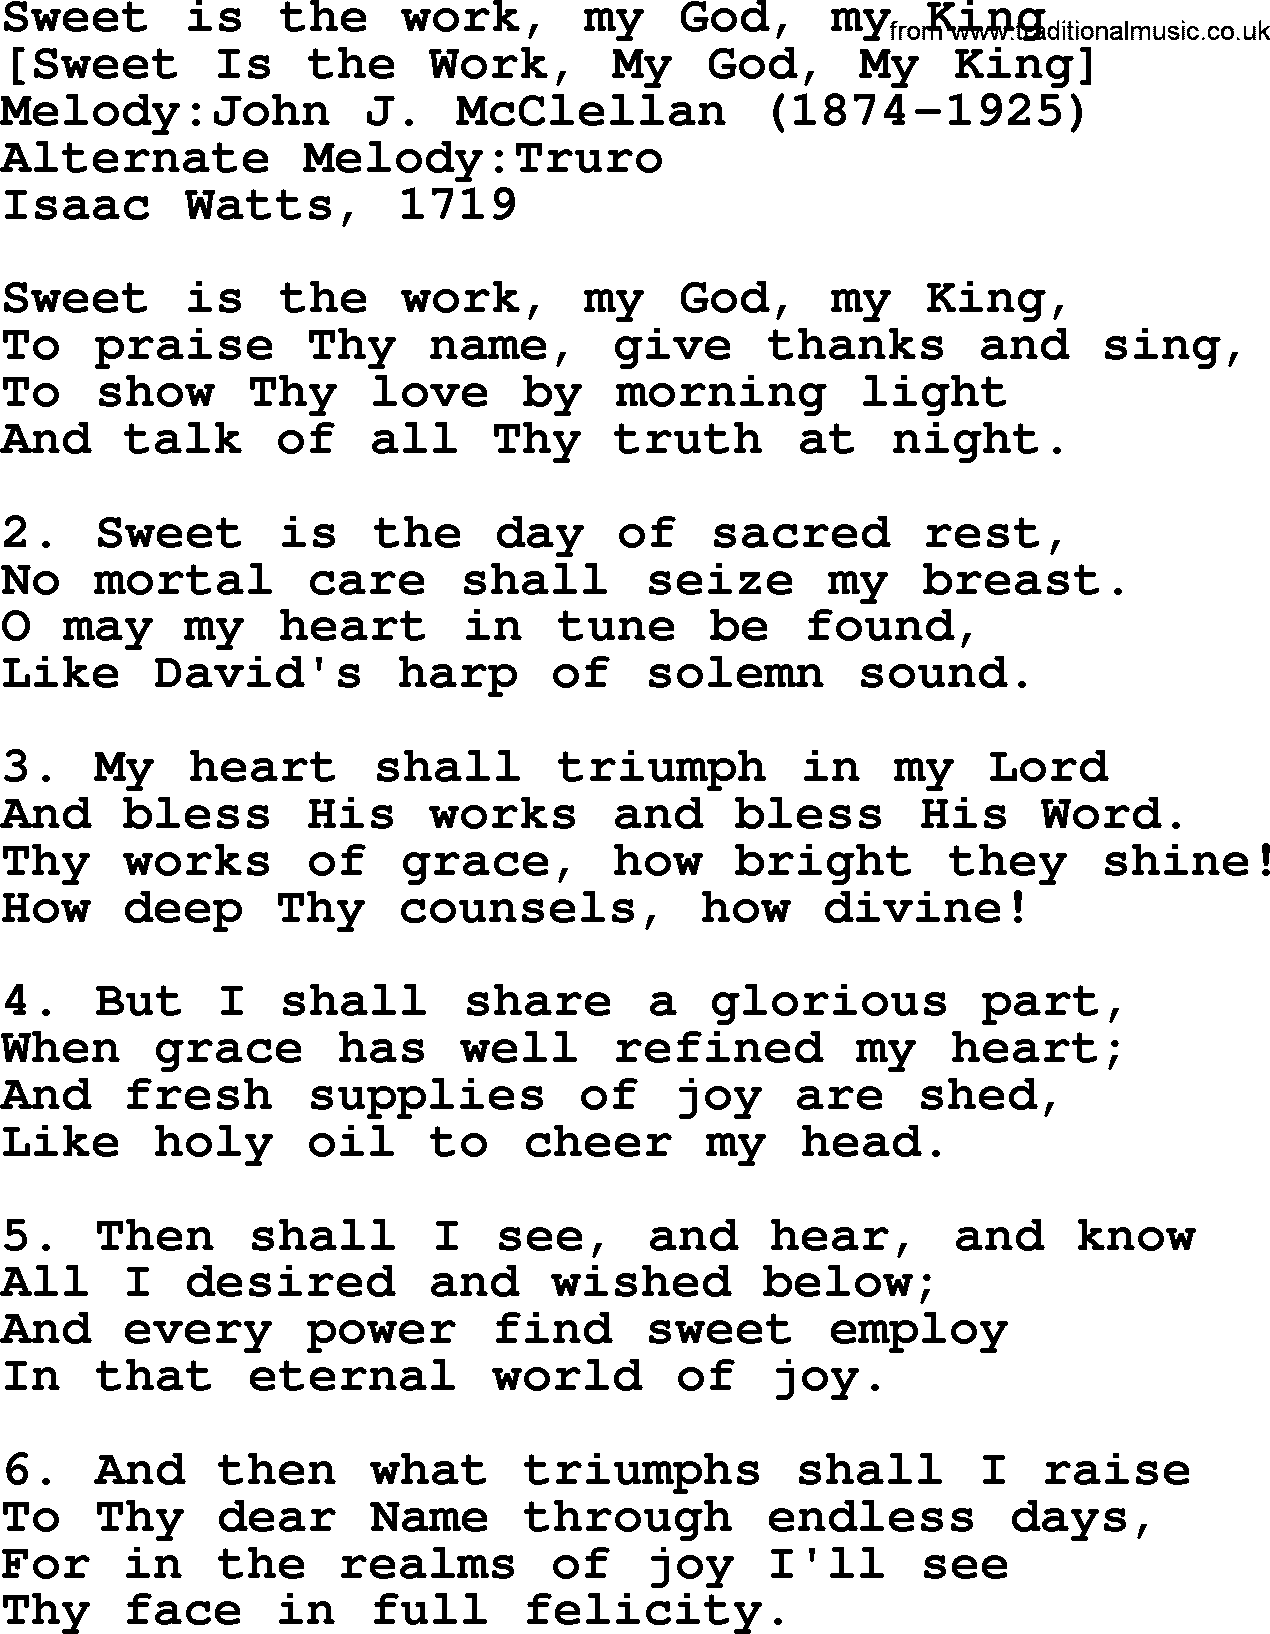 Old English Song: Sweet Is The Work, My God, My King lyrics